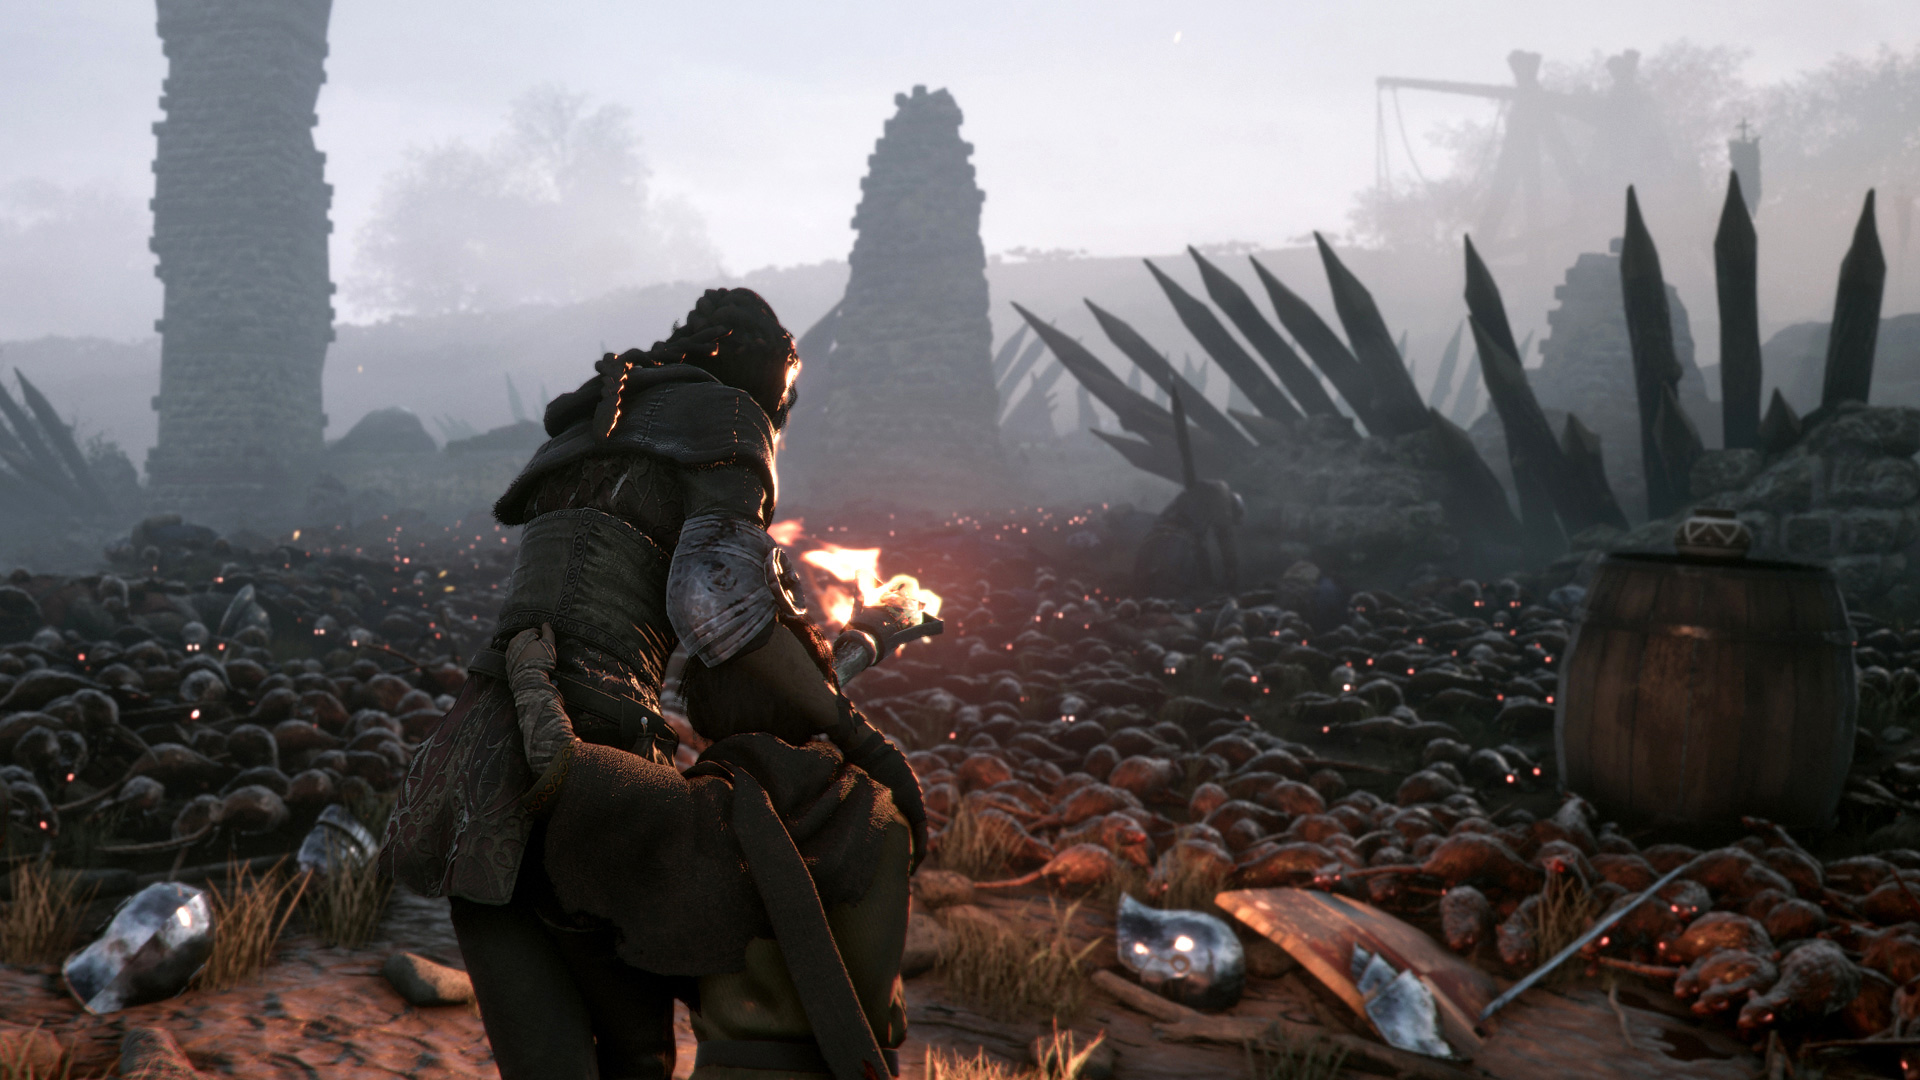 A Plague Tale: Innocence Download Free